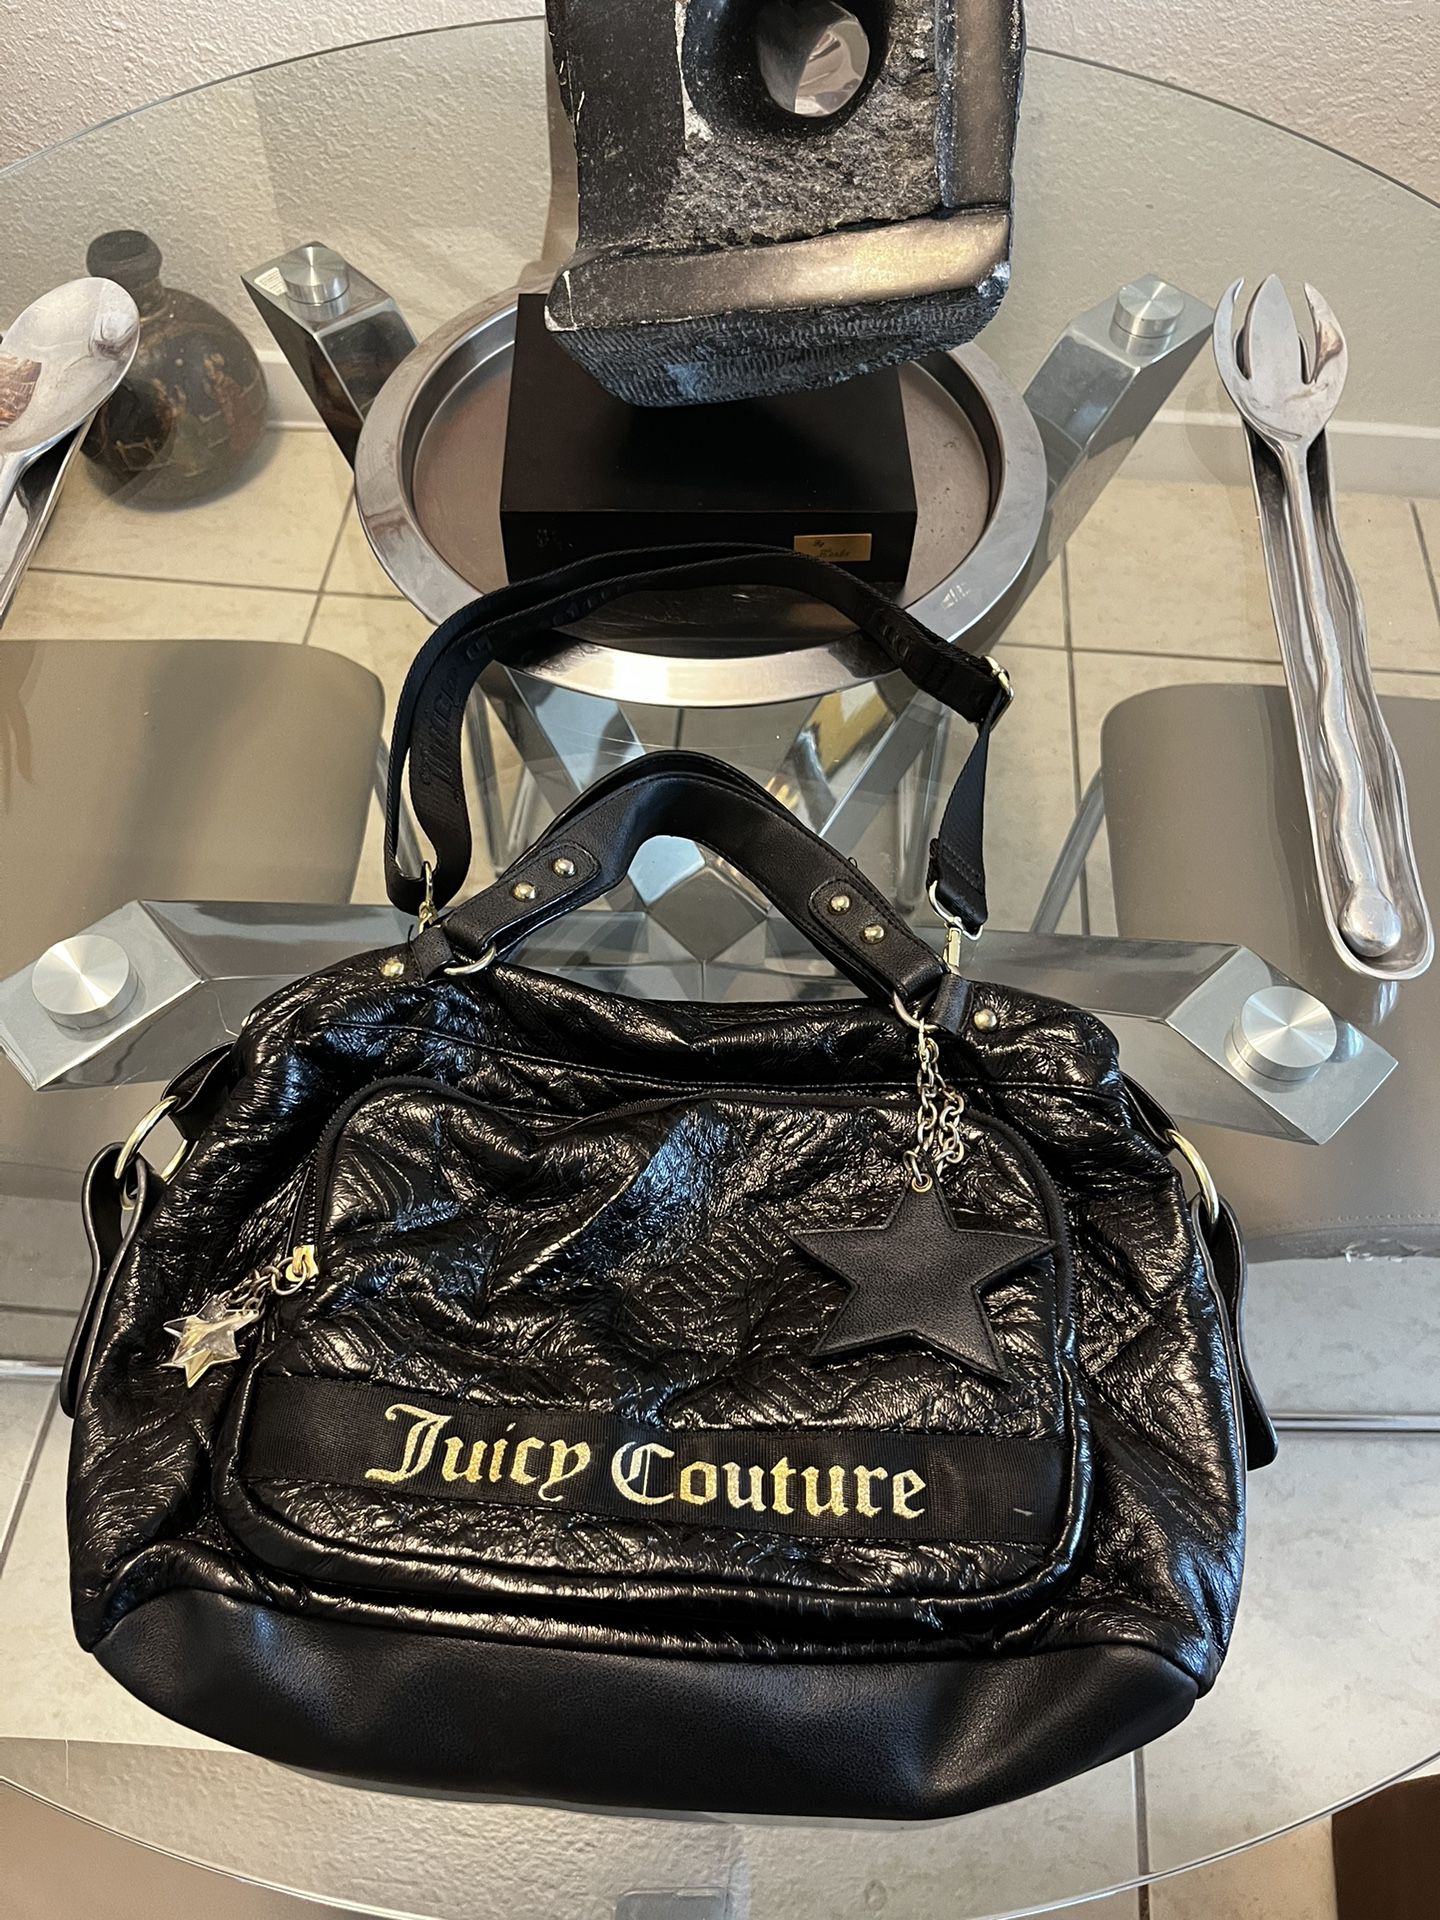 Like New Rare Vintage Juicy Couture Black Handbag $100  OBO/ Shipping Available 